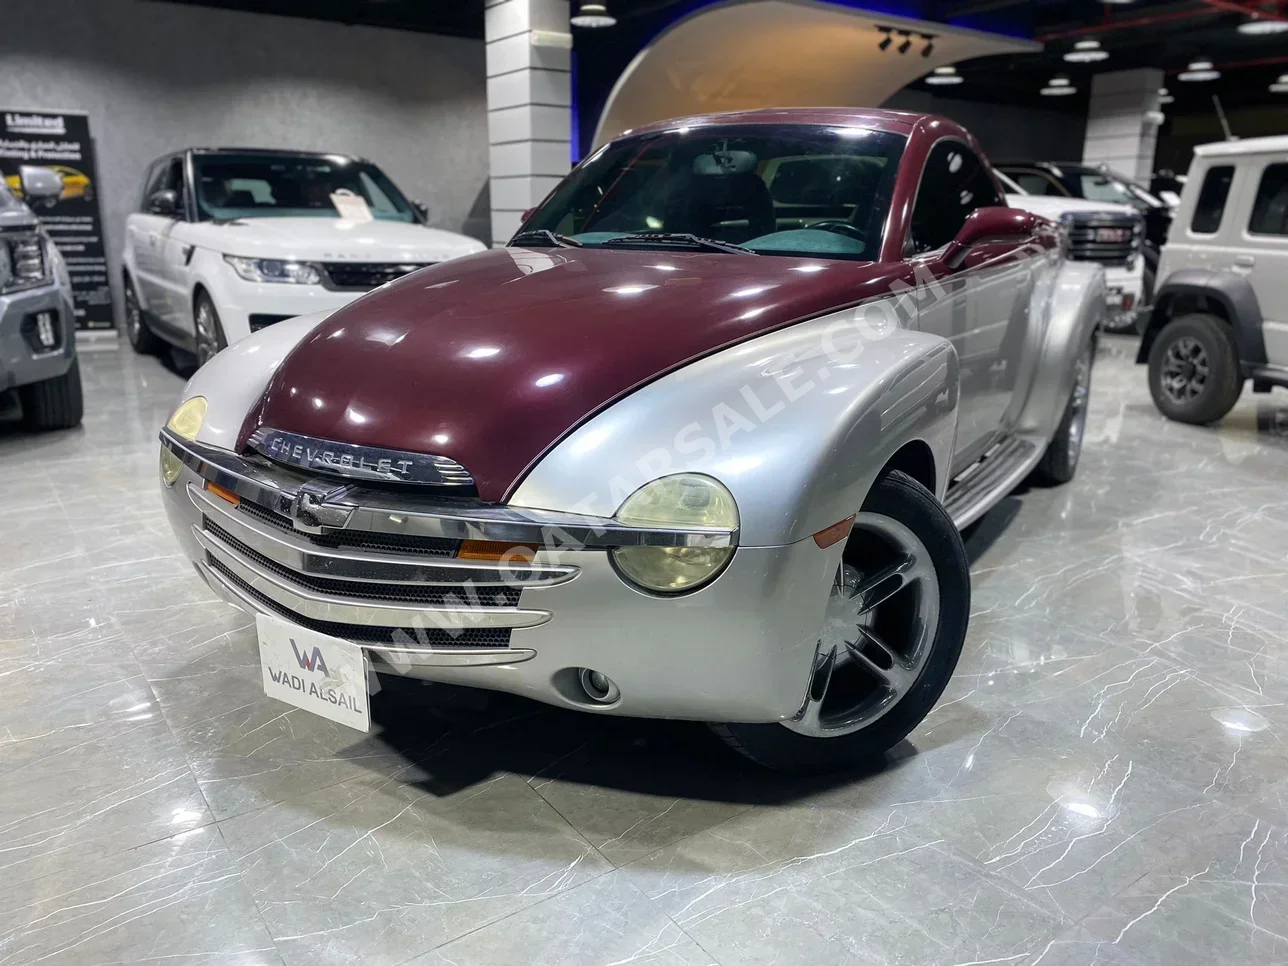 Chevrolet  SSR  2005  Automatic  157,000 Km  6 Cylinder  All Wheel Drive (AWD)  Pick Up  Red and Silver